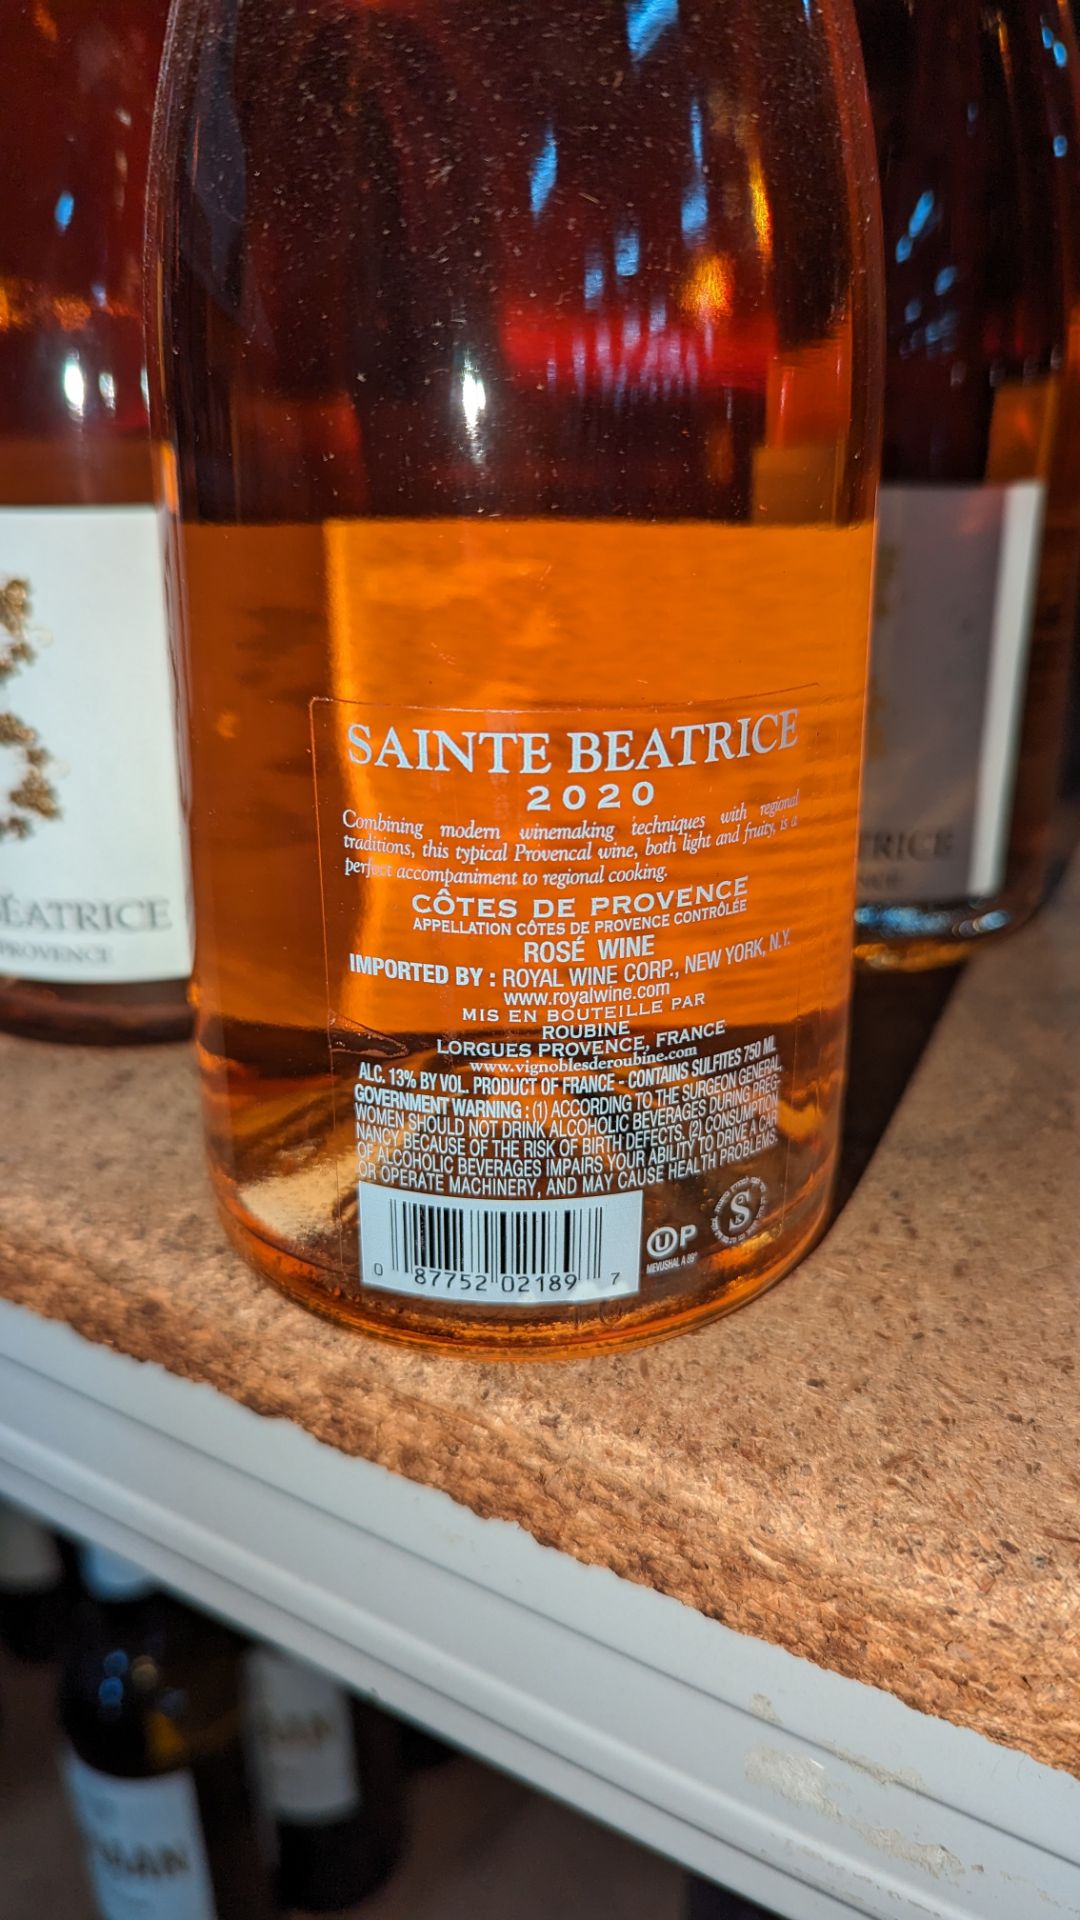 14 bottles of Sainte Béatrice Côtes de Provence 2020 rosé French wine sold under AWRS number XQAW000 - Image 4 of 4